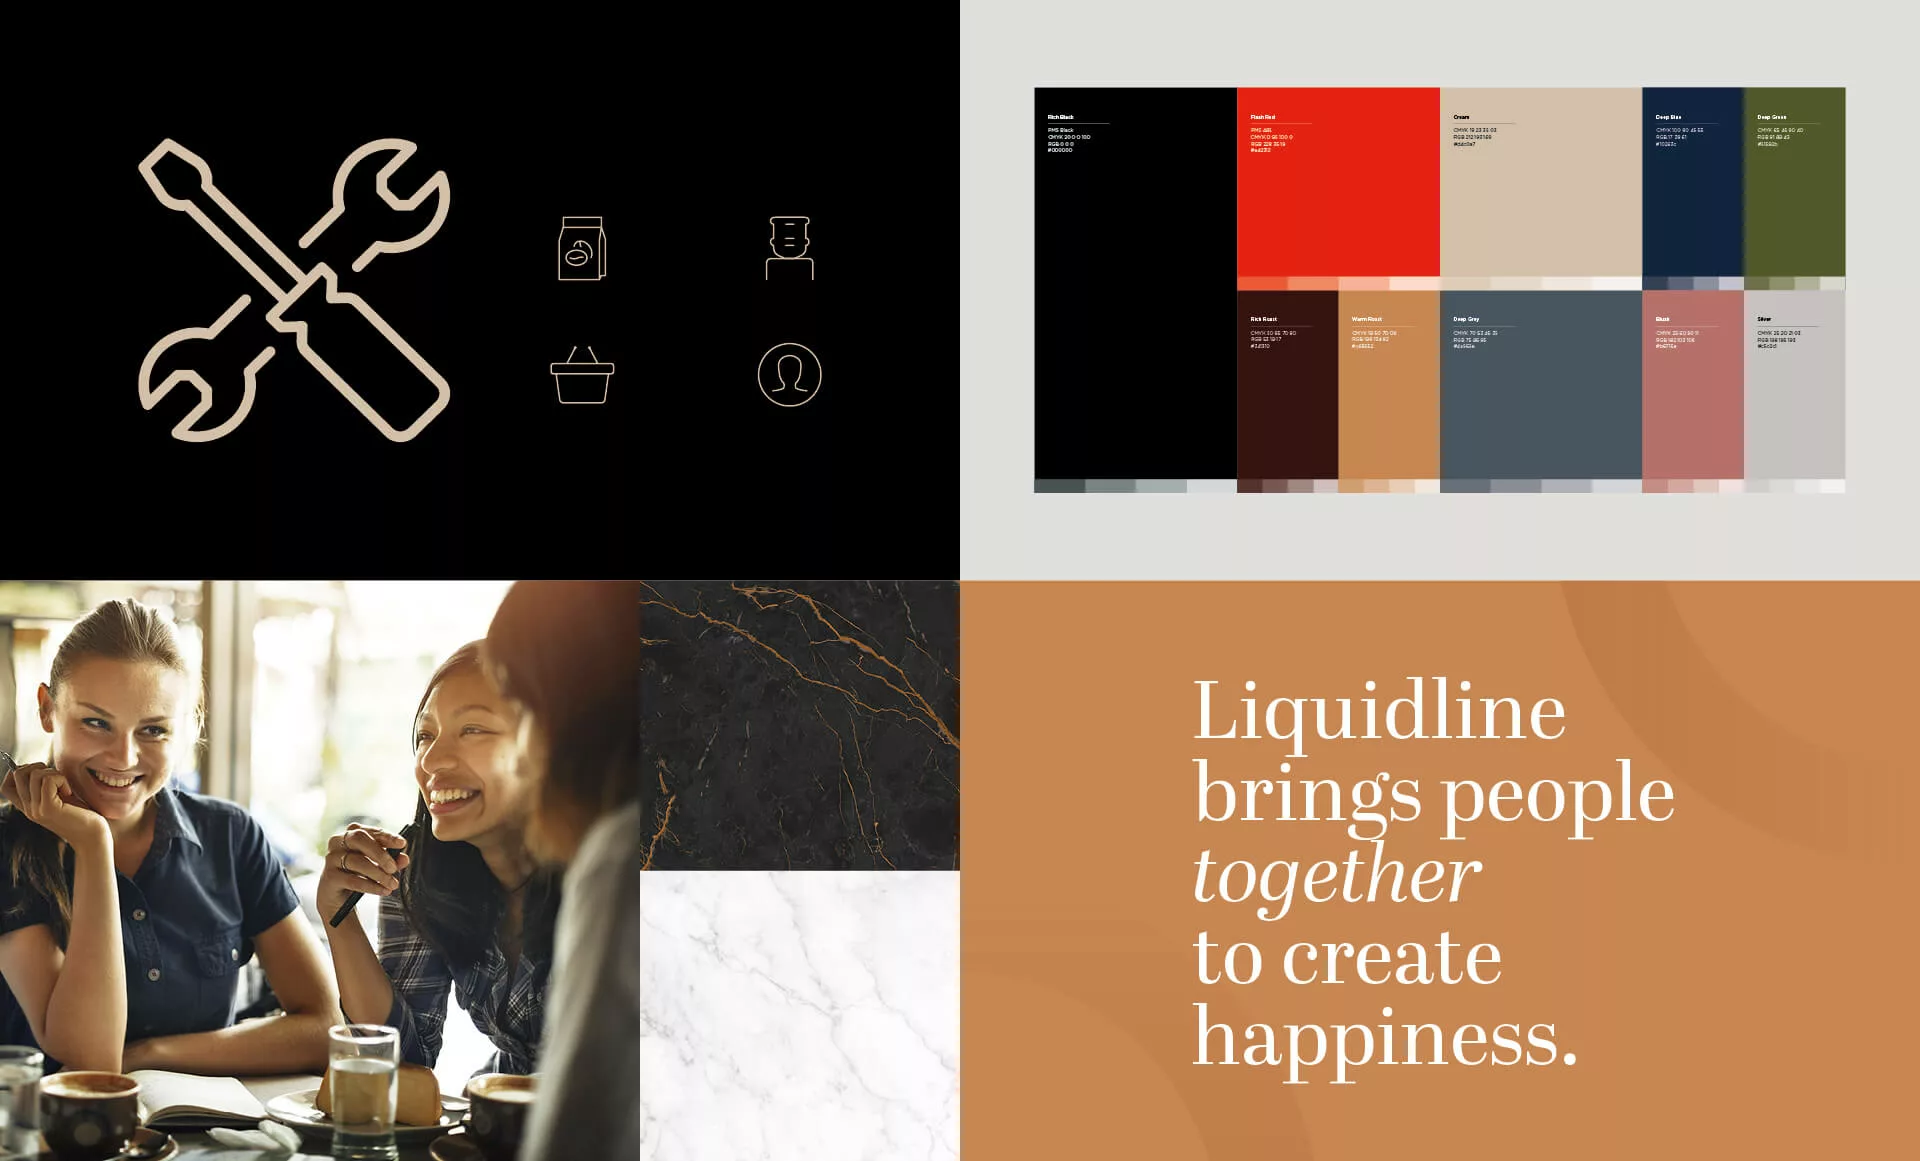 4 images showing icons, colours and typography from the Liquidline branding